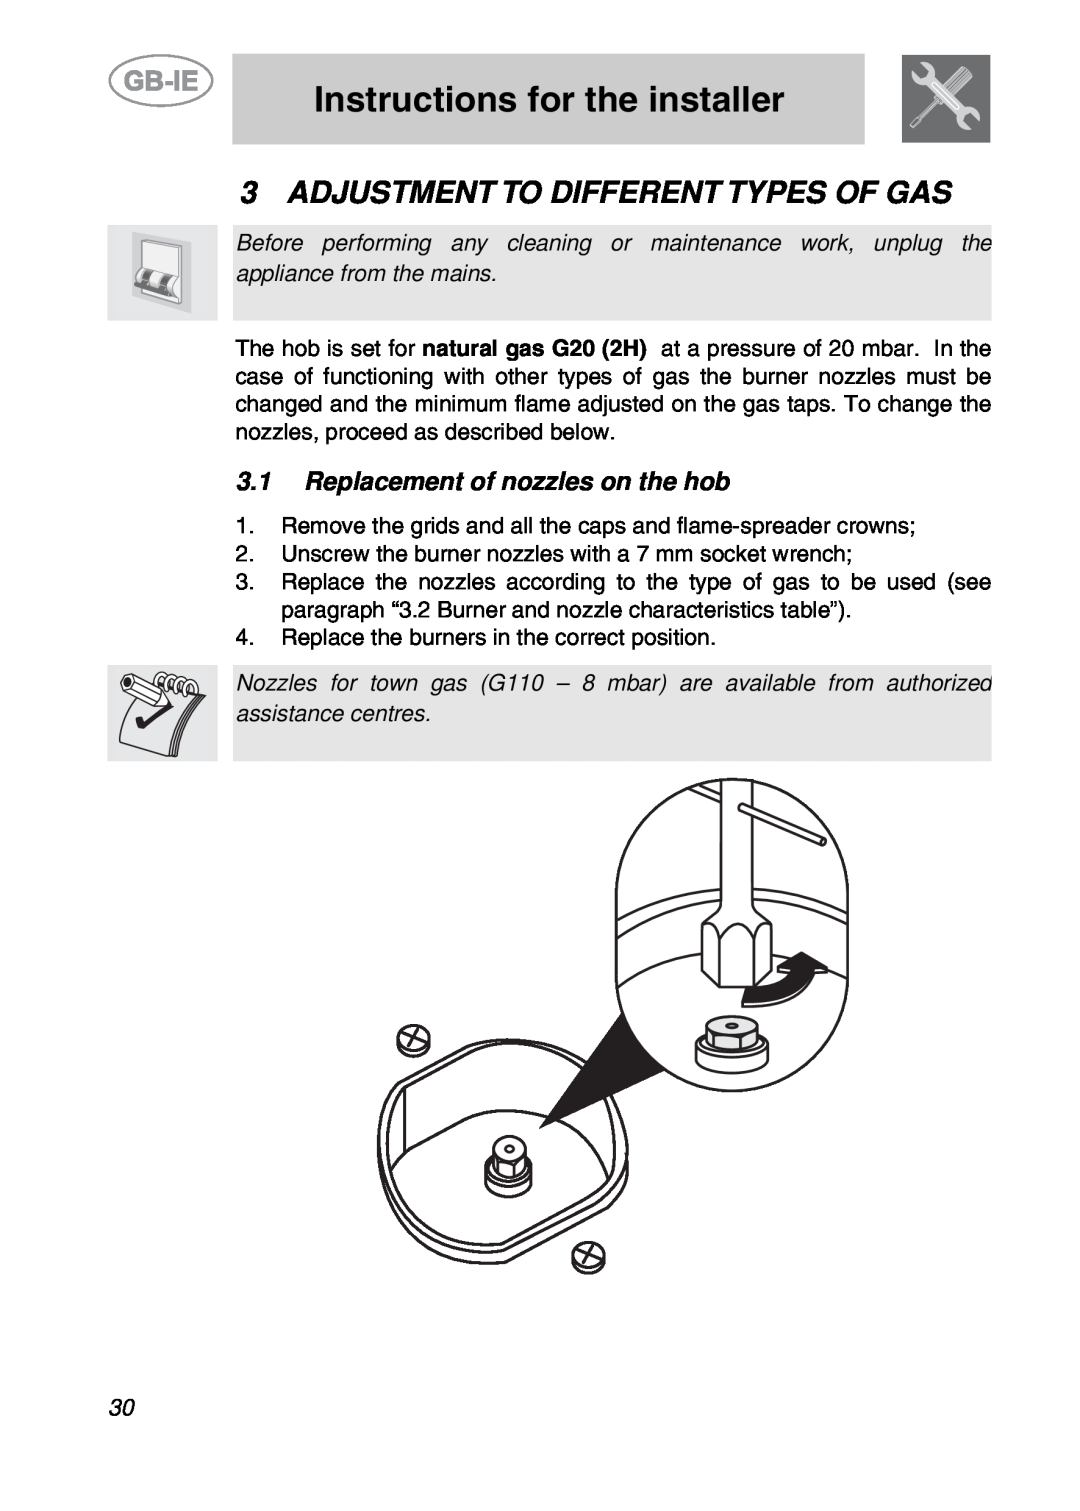 Smeg PGF95-2 manual Adjustment To Different Types Of Gas, Replacement of nozzles on the hob, Instructions for the installer 